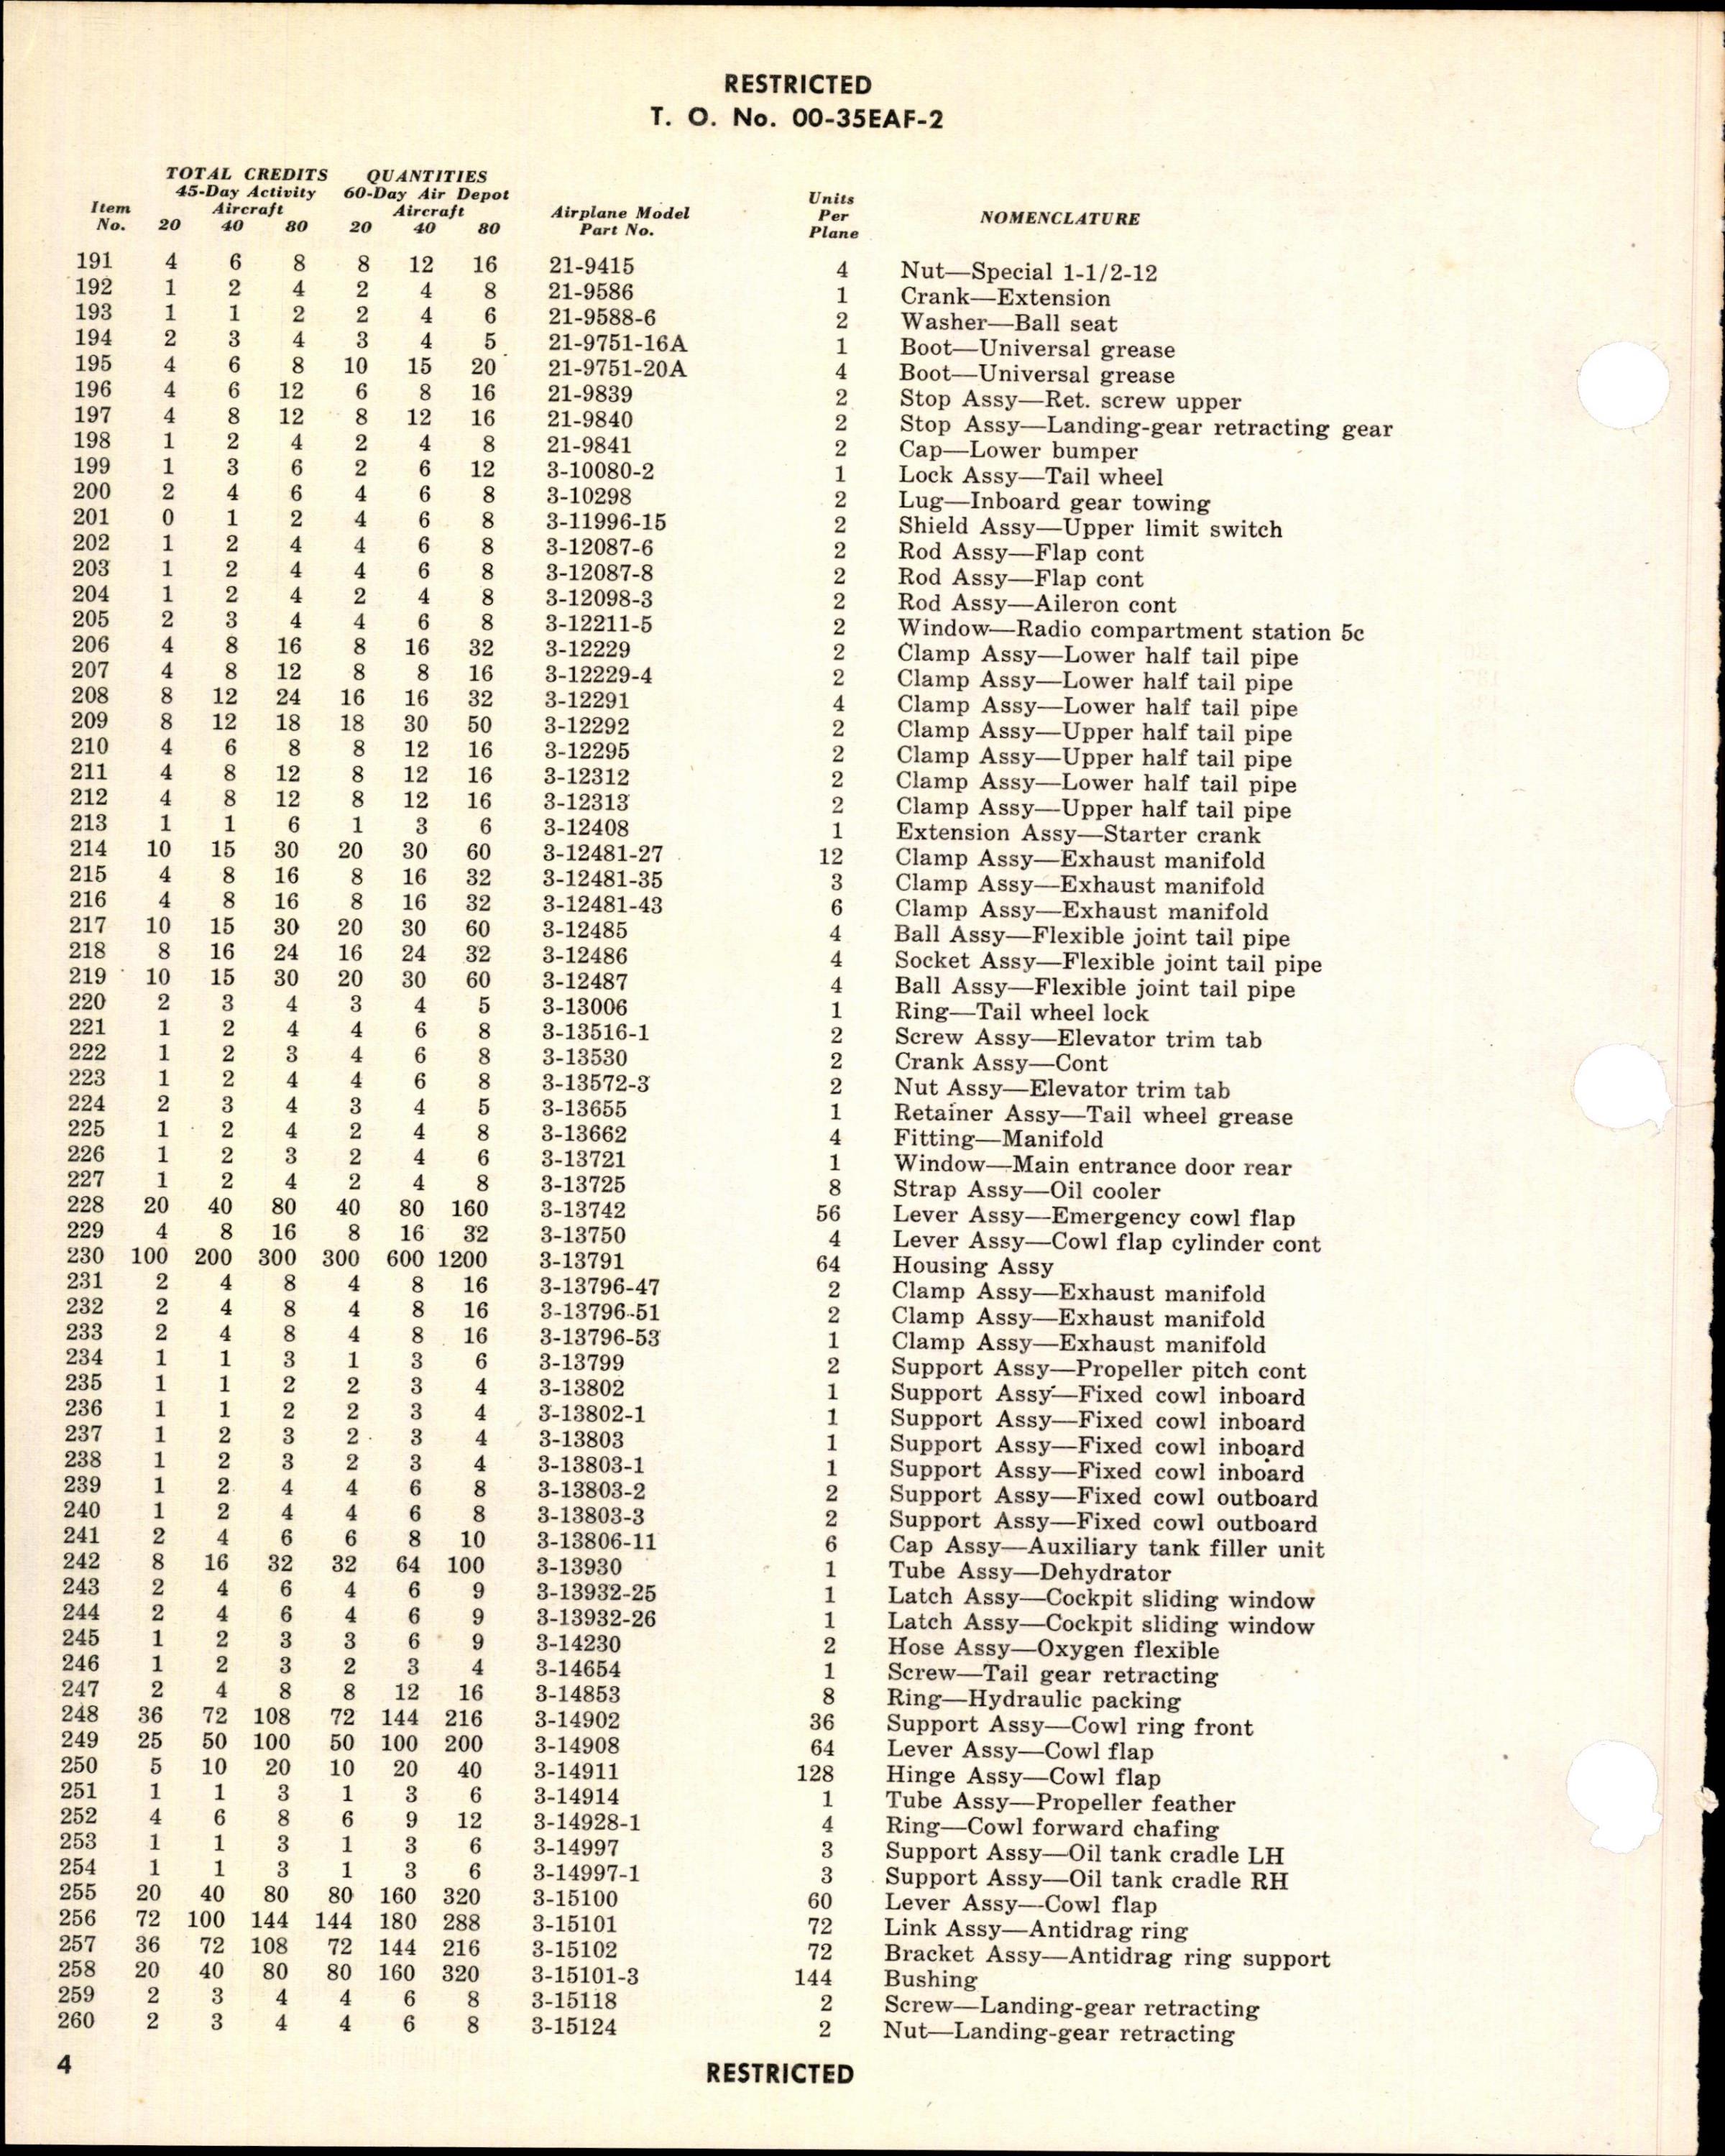 Sample page 6 from AirCorps Library document: Table of Credit - Airplane Maintenance Parts - for B-17G Series